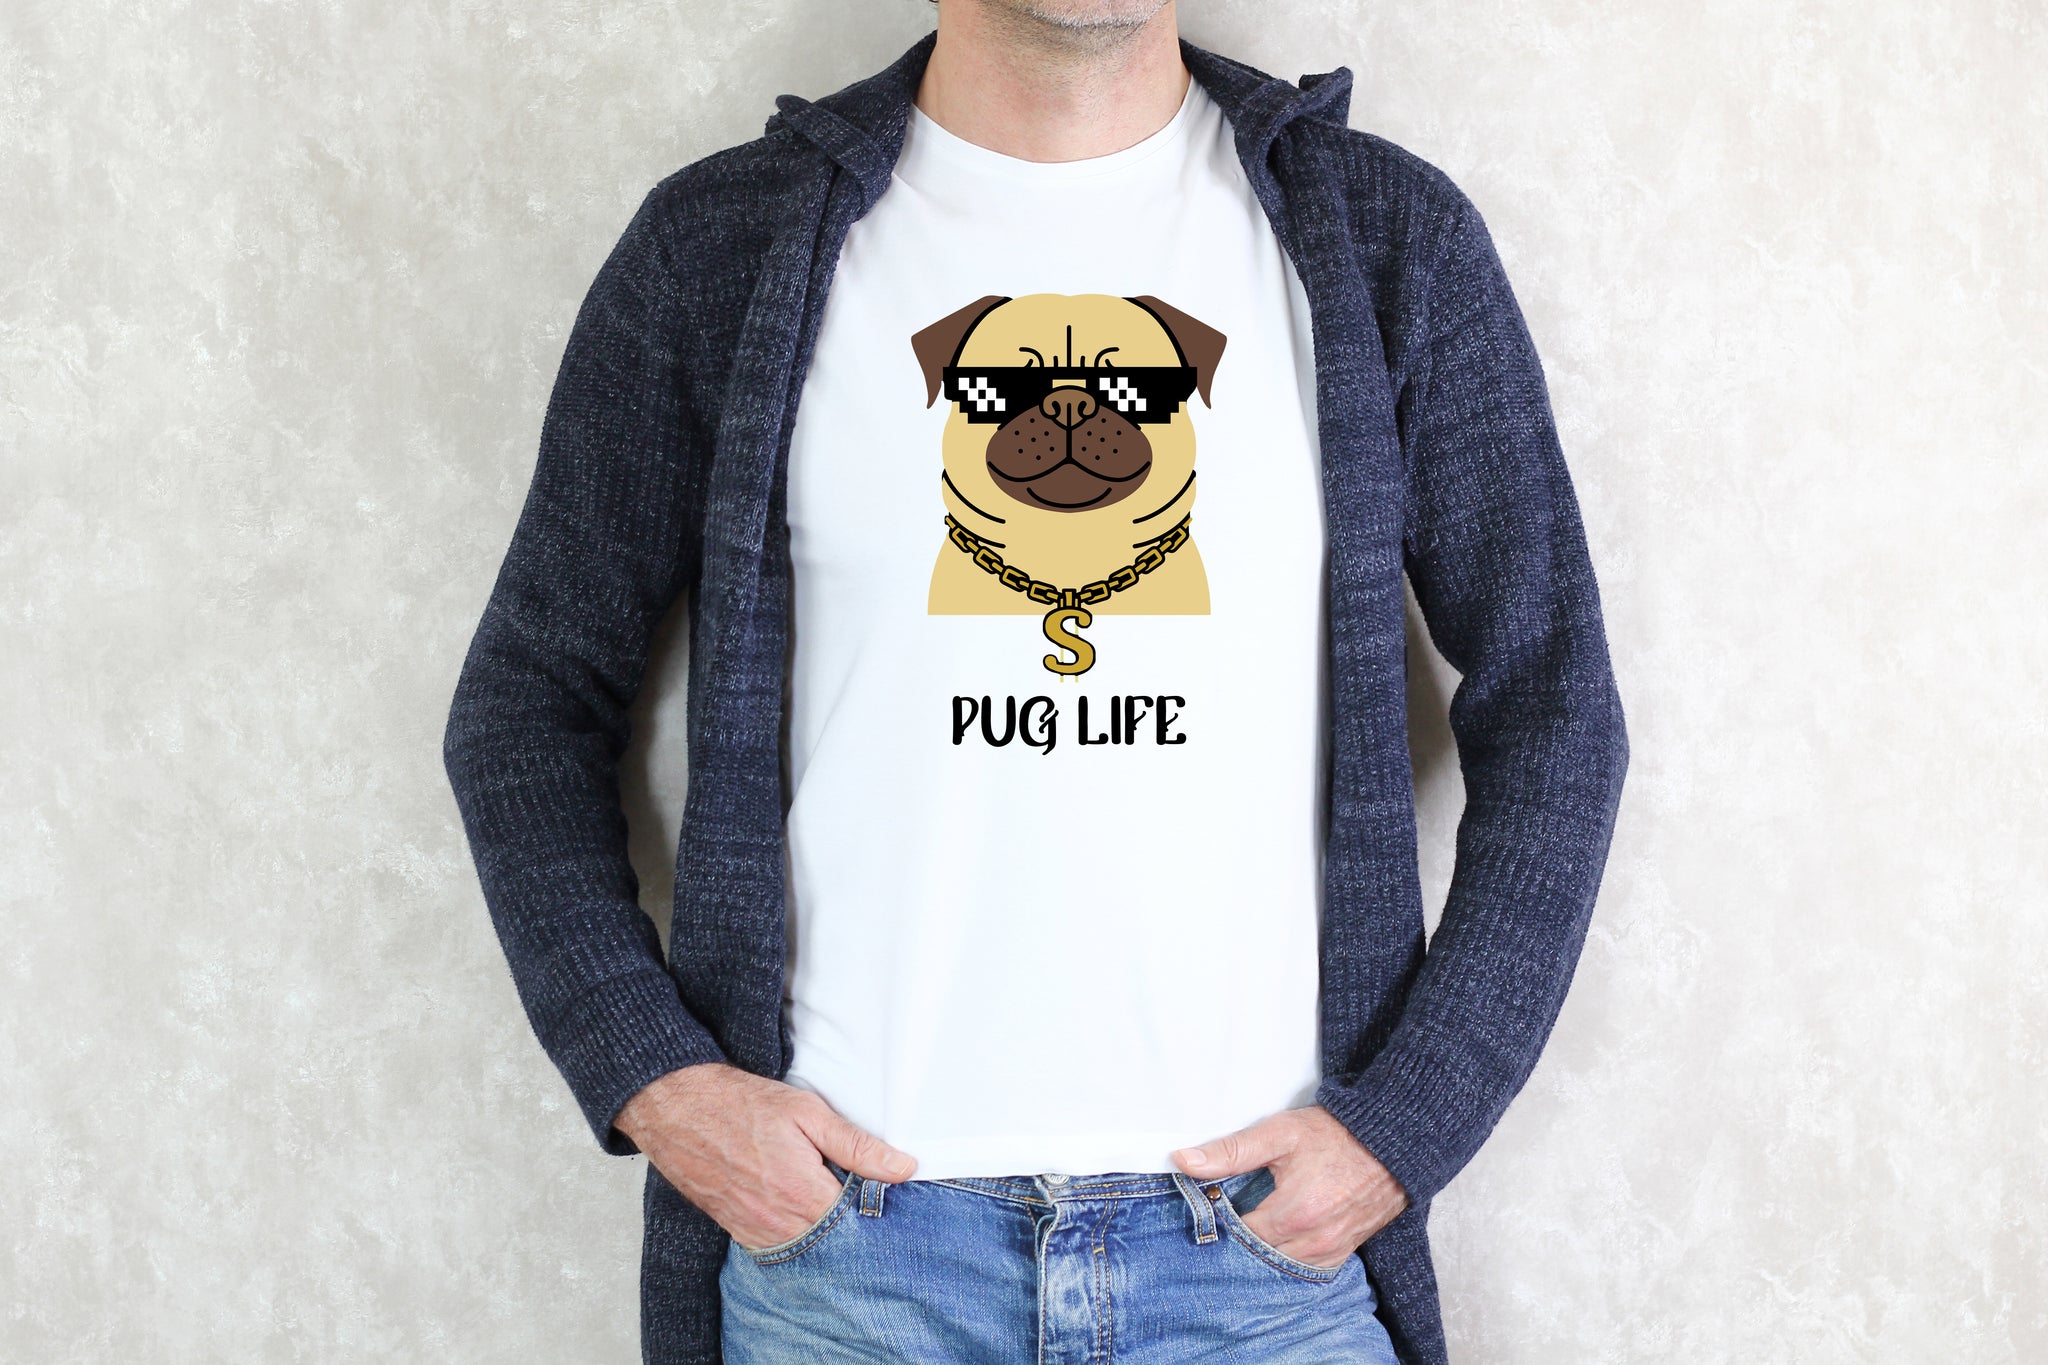 His & Hers 'Pug Life' T-Shirts with matching Coasters - Design by Handmade By Pixies - Made to Order - Muffin Pug Rescue Charity